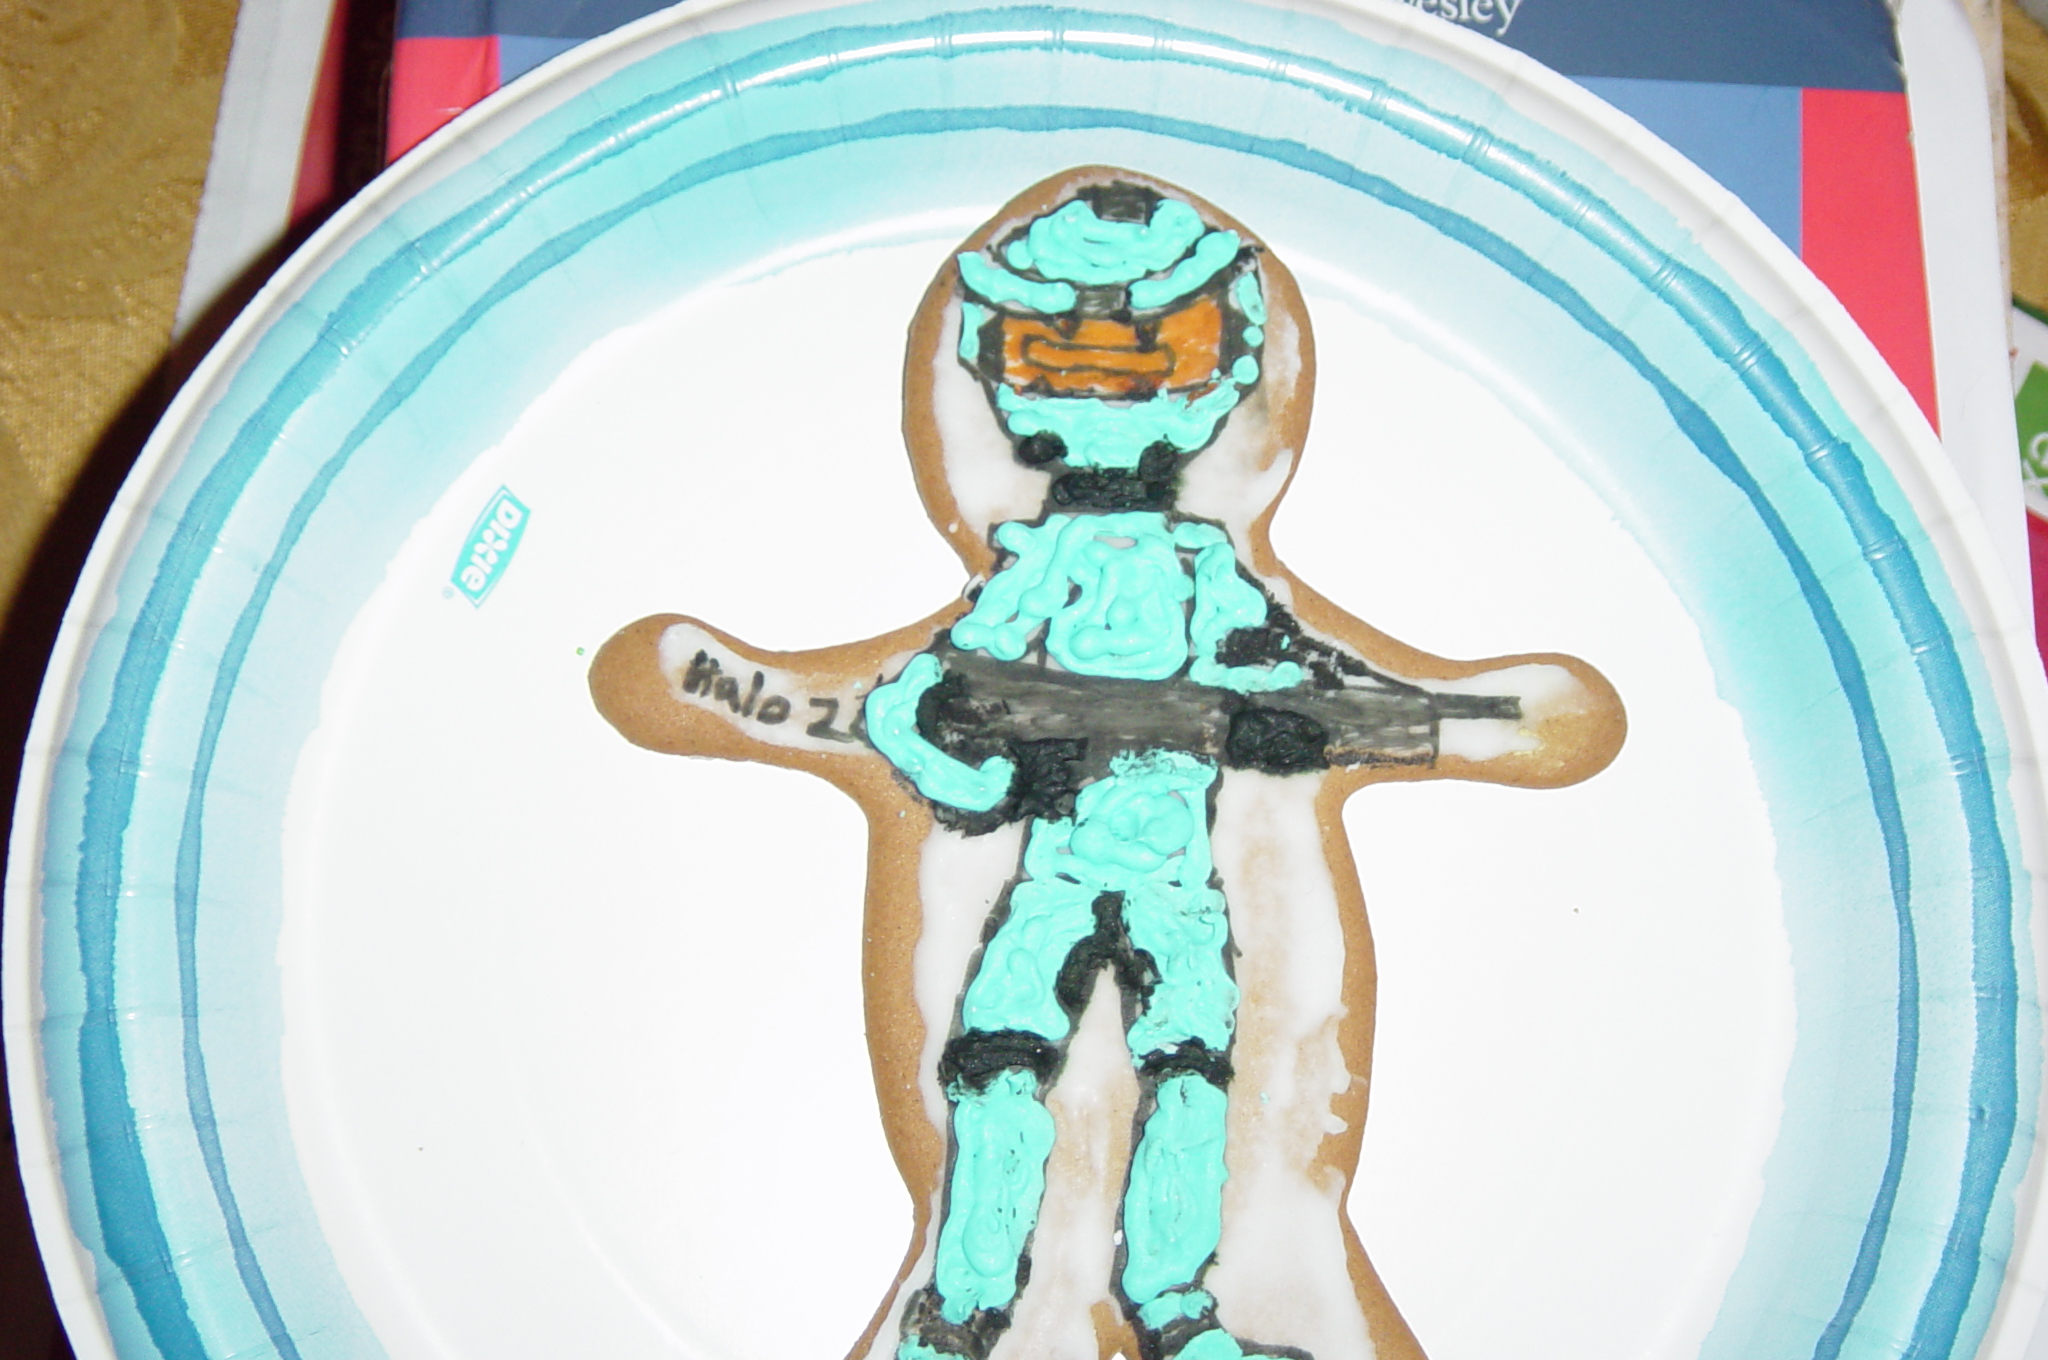 Halo 2 Spartan(me) Ginger Bread Man by Flare_Boy